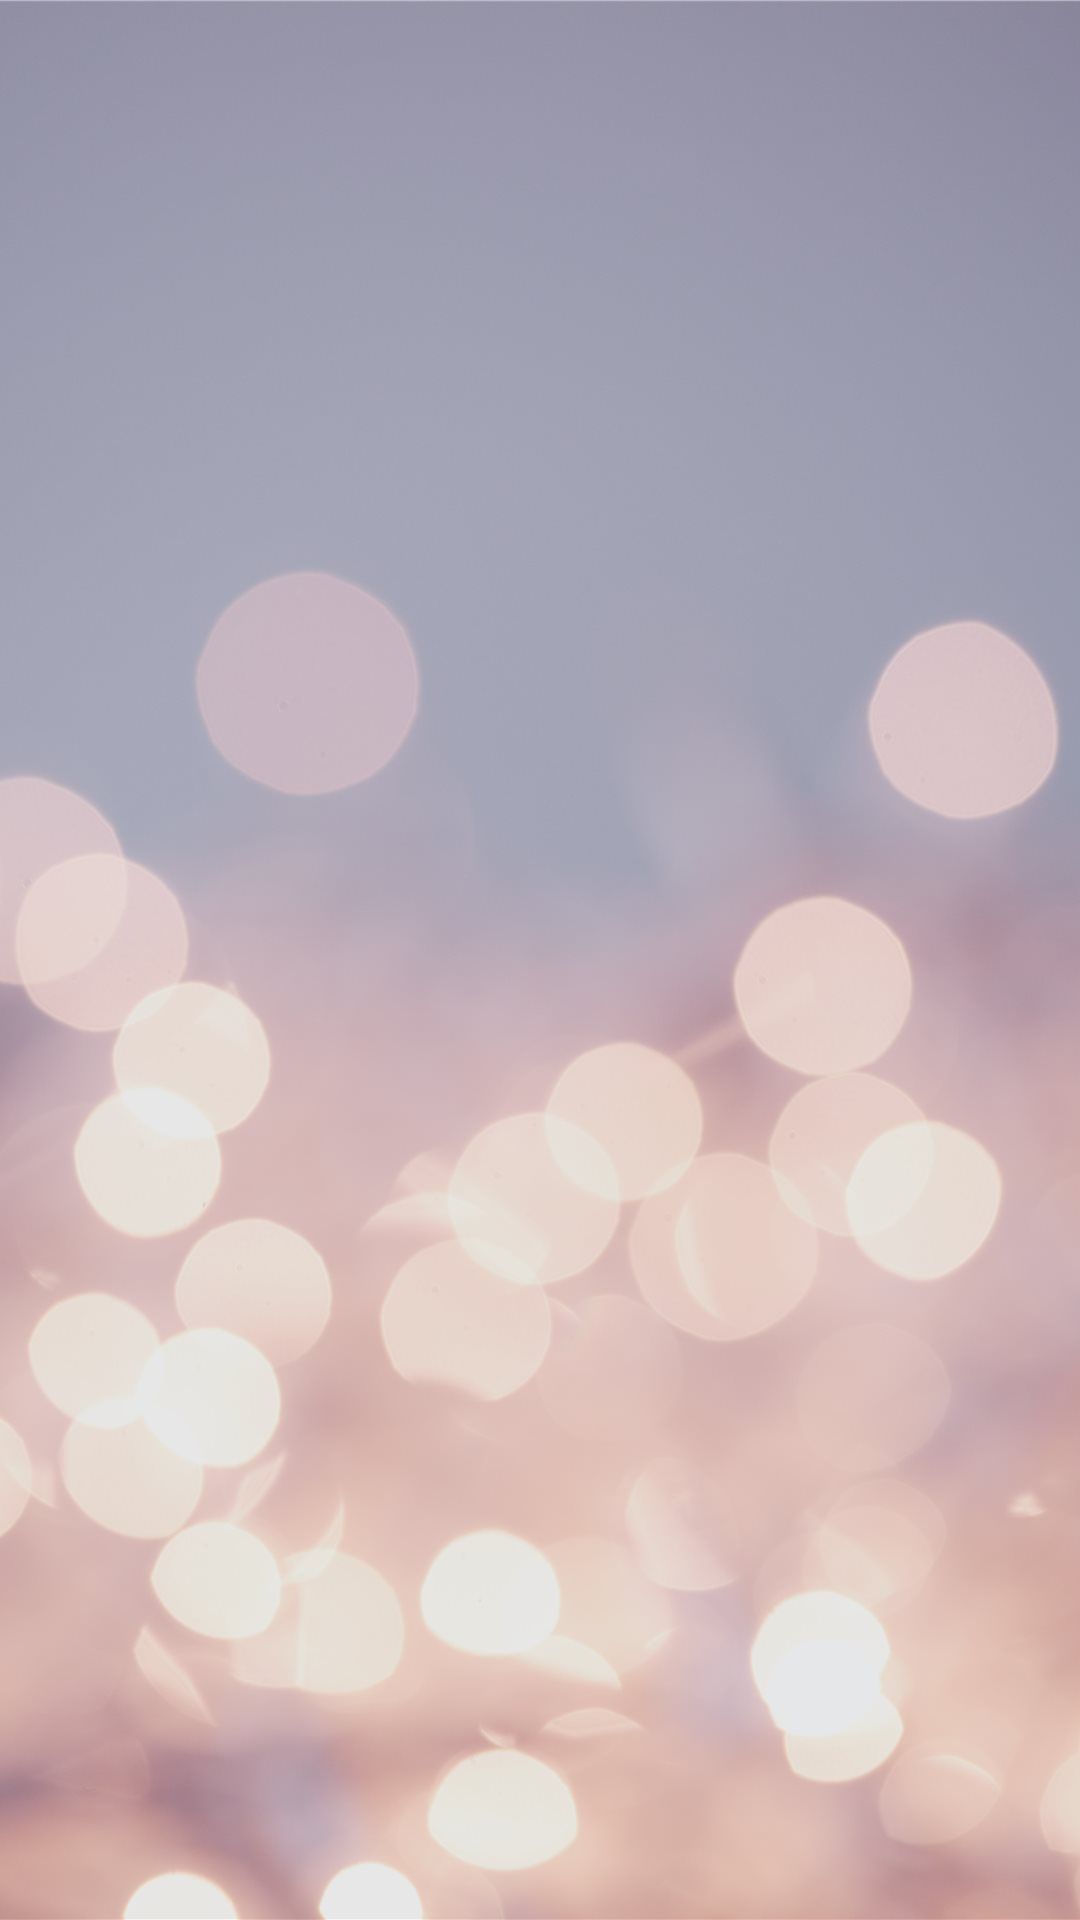 A pink and purple bokeh background image - Pastel, bright, bubbles